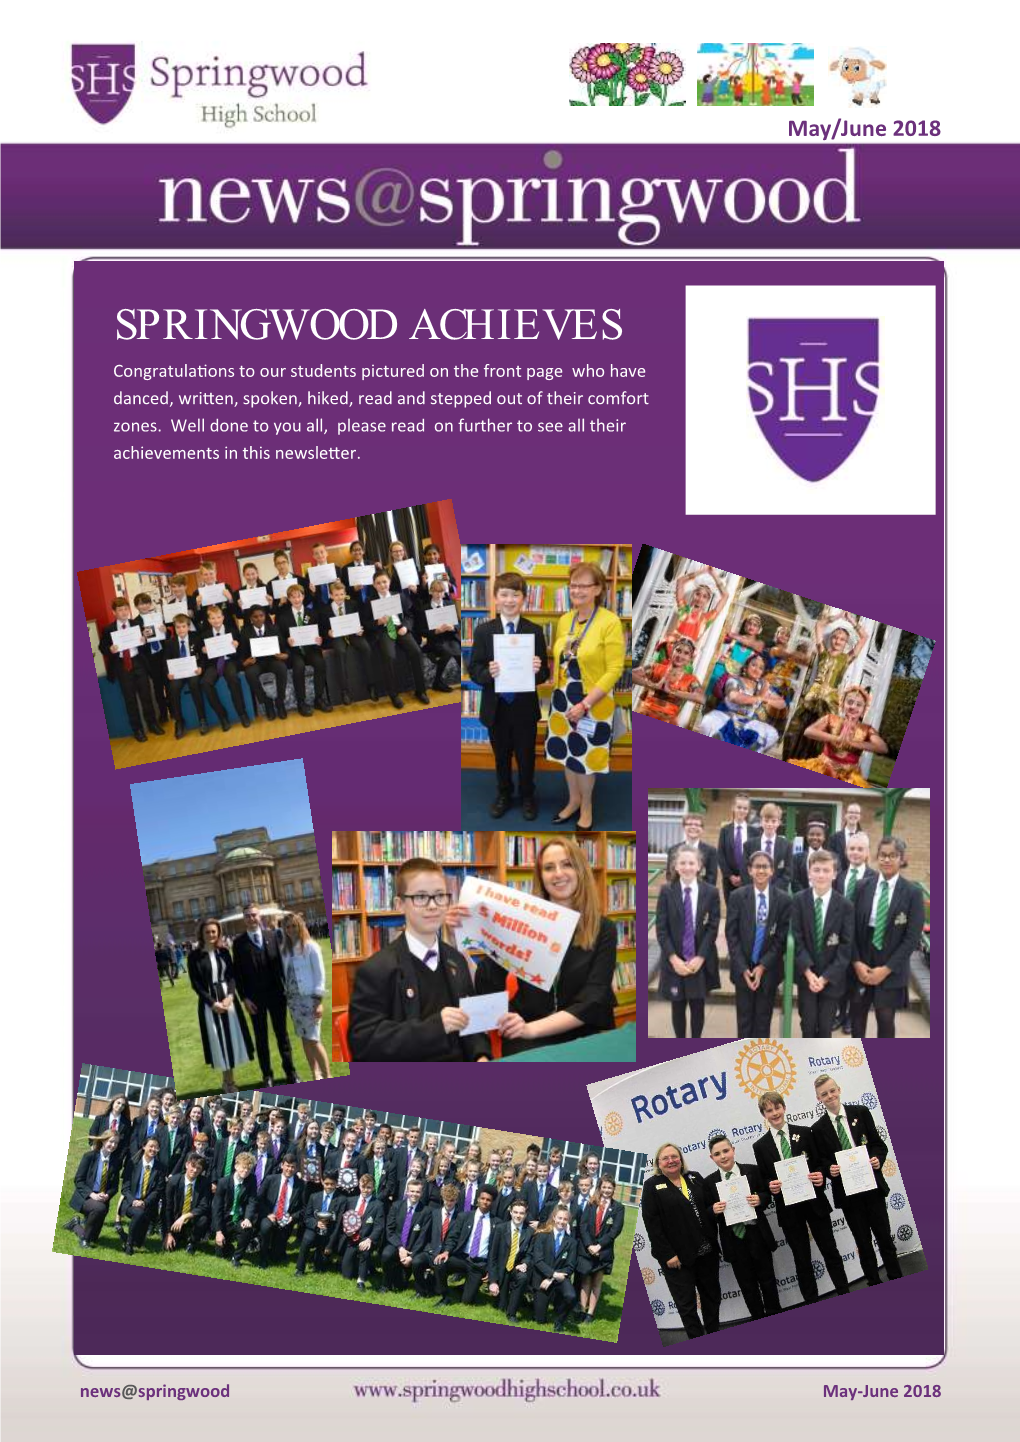 SPRINGWOOD ACHIEVES Congratulations to Our Students Pictured on the Front Page Who Have Danced, Written, Spoken, Hiked, Read and Stepped out of Their Comfort Zones